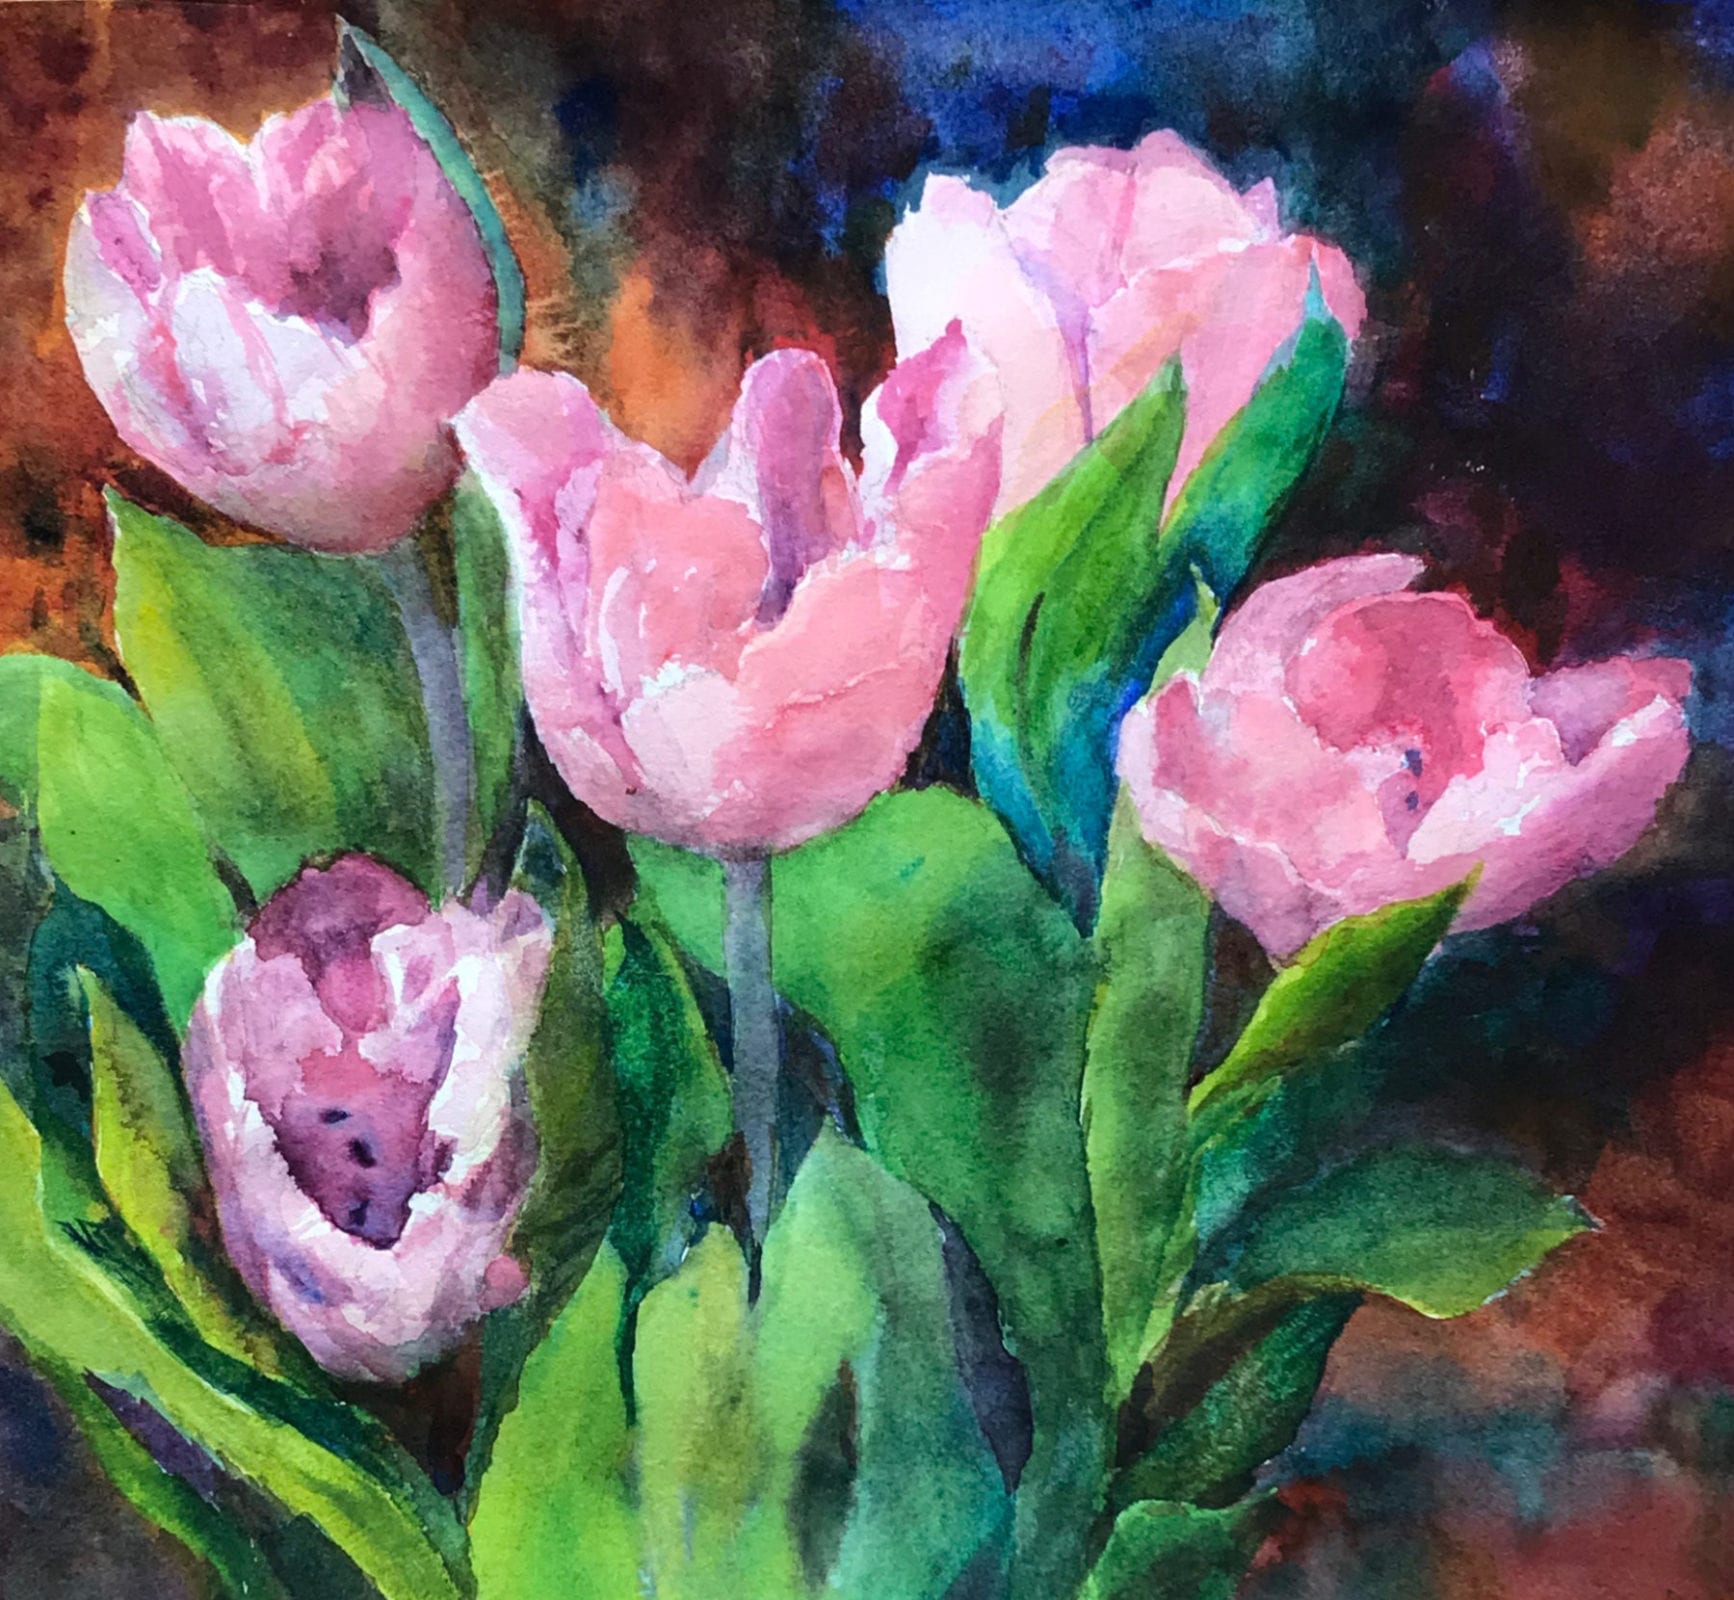 Janet Waronker, Tulip Time, watercolor, 18.5 x 17 inches